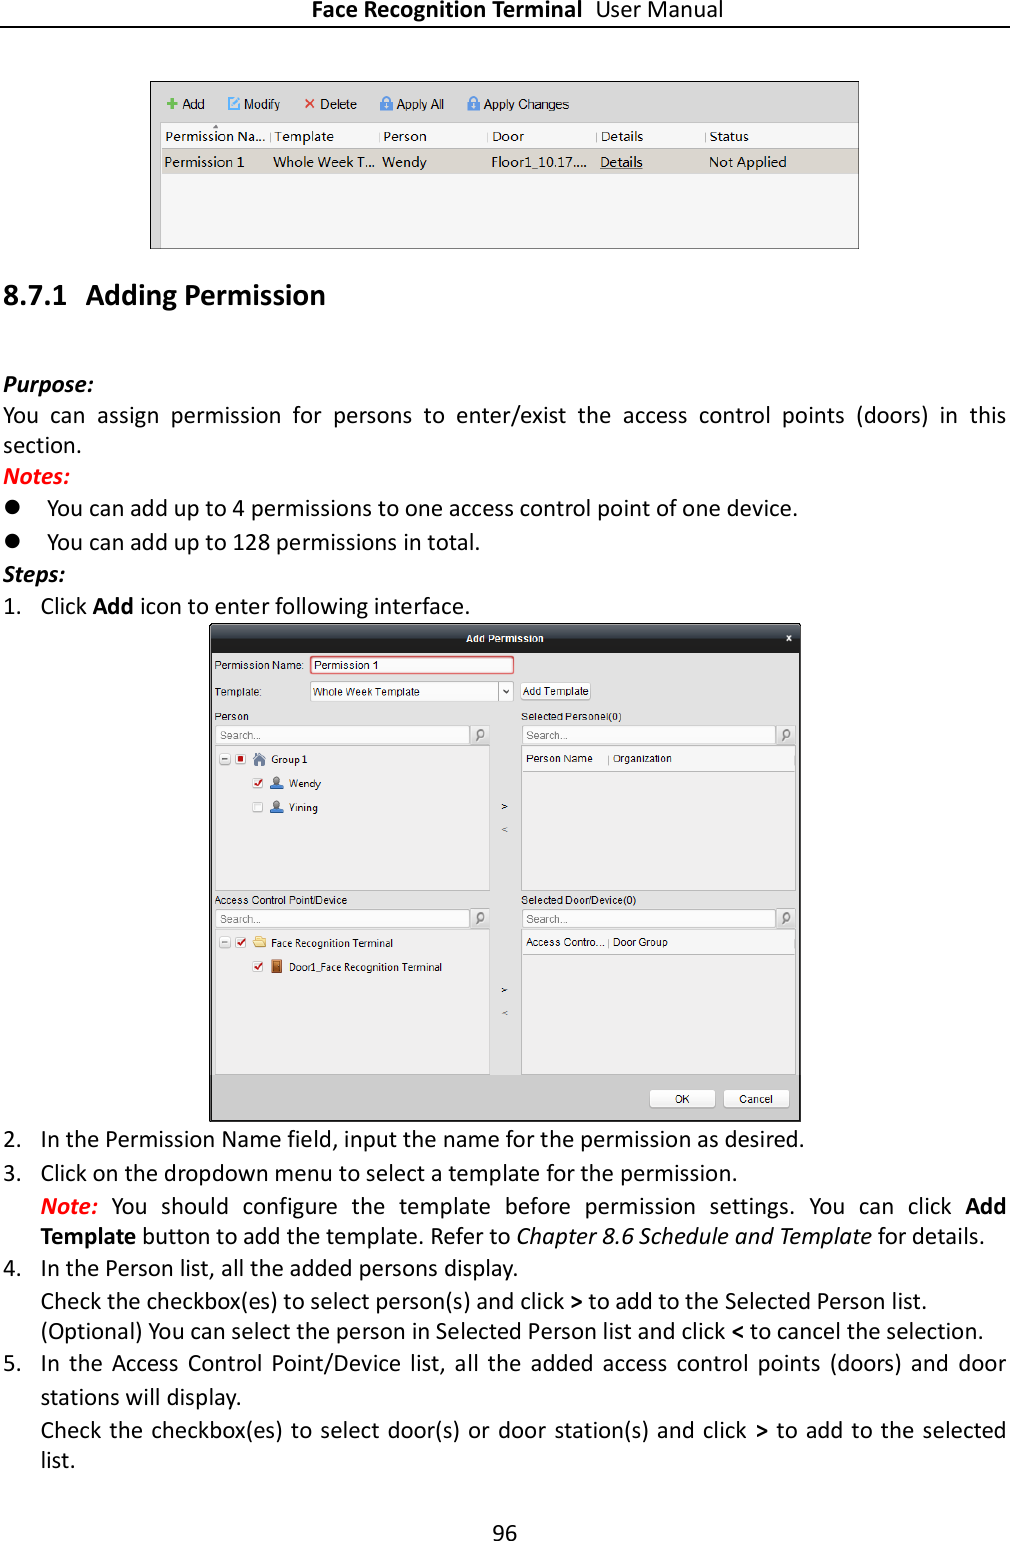 Face Recognition Terminal User Manual 96   8.7.1 Adding Permission Purpose: You  can  assign  permission  for  persons  to  enter/exist  the  access  control  points  (doors)  in  this section.   Notes:    You can add up to 4 permissions to one access control point of one device.  You can add up to 128 permissions in total. Steps: 1. Click Add icon to enter following interface.    2. In the Permission Name field, input the name for the permission as desired. 3. Click on the dropdown menu to select a template for the permission. Note:  You  should  configure  the  template  before  permission  settings.  You  can  click  Add Template button to add the template. Refer to Chapter 8.6 Schedule and Template for details.   4. In the Person list, all the added persons display. Check the checkbox(es) to select person(s) and click &gt; to add to the Selected Person list. (Optional) You can select the person in Selected Person list and click &lt; to cancel the selection. 5. In  the  Access  Control  Point/Device  list,  all  the  added  access  control  points  (doors)  and  door stations will display. Check the checkbox(es) to select door(s) or door station(s) and click  &gt;  to add to the selected list. 